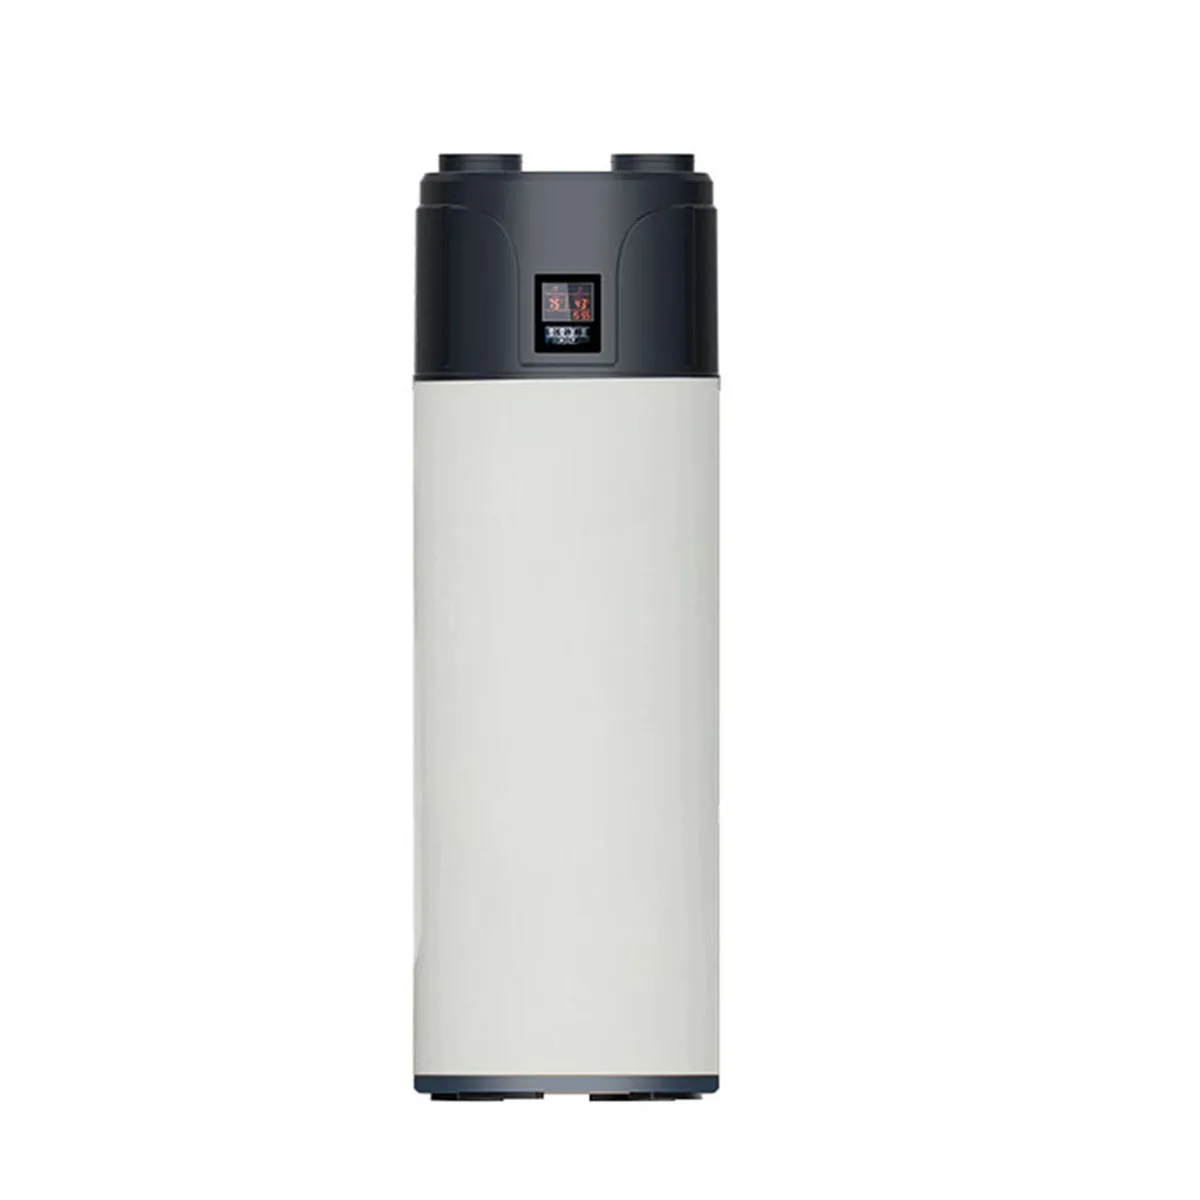 R290 domestic All in one hot water heat pump air source